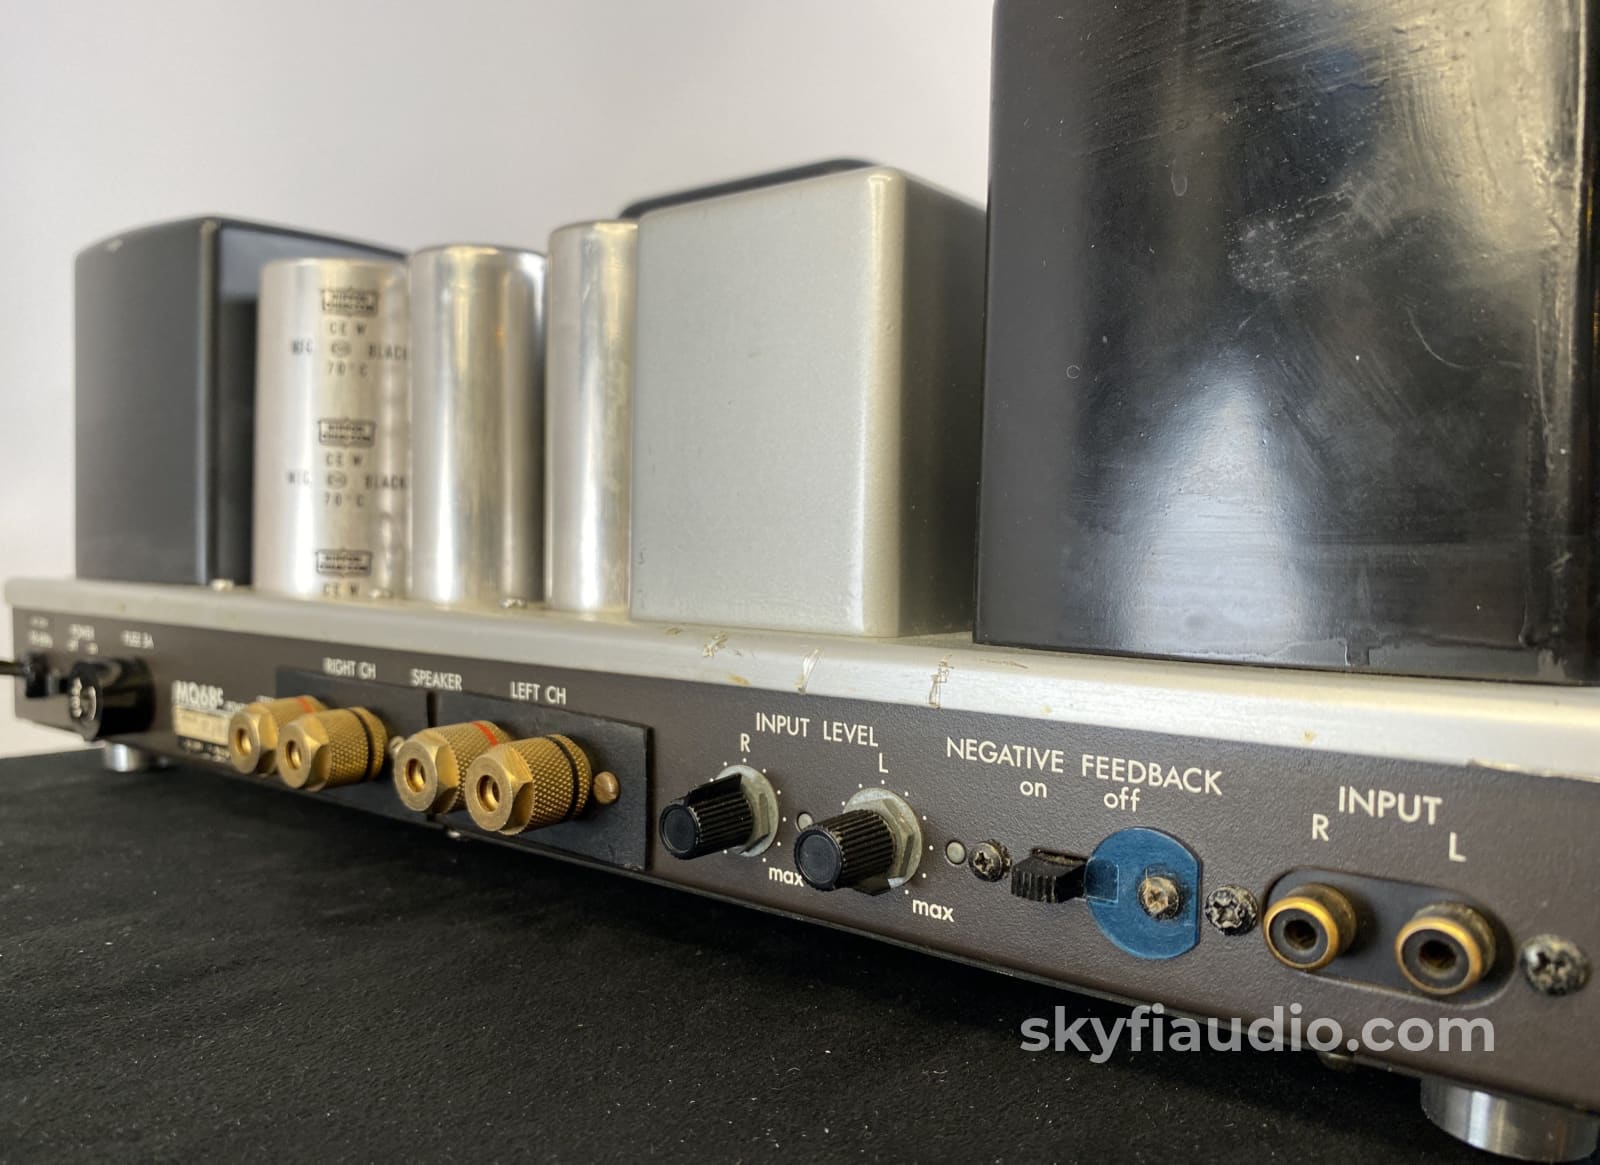 Luxman Mq68C - Custom 68 Tube Amplifier With Official Luxman/Nec Tubes